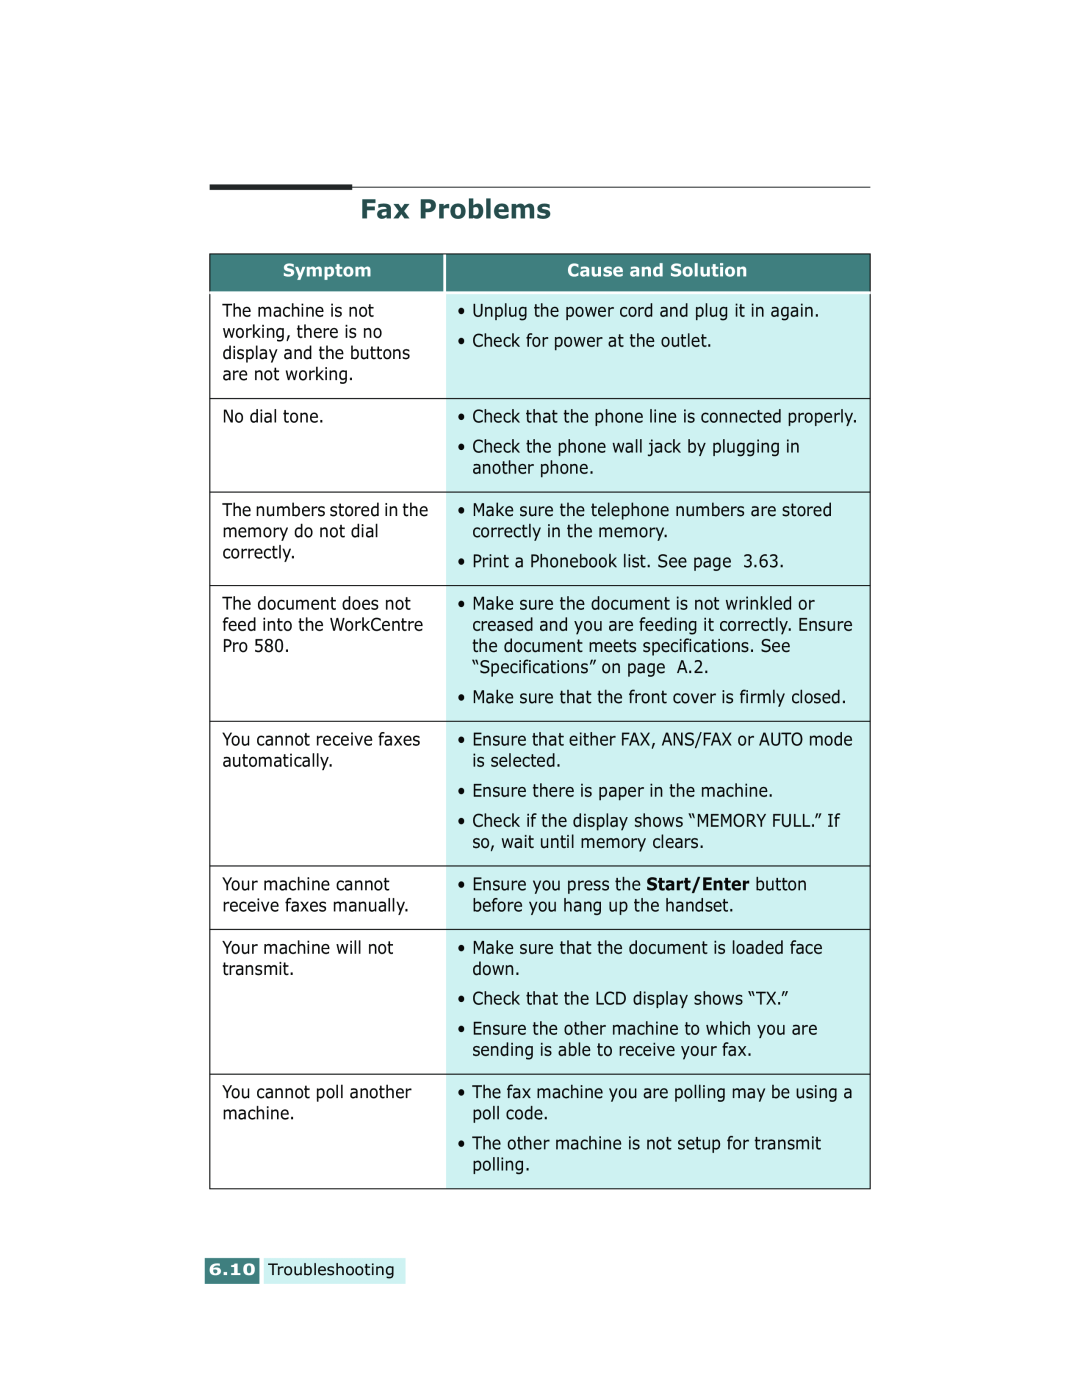 Xerox Pro 580 manual Fax Problems, Symptom, Cause and Solution 